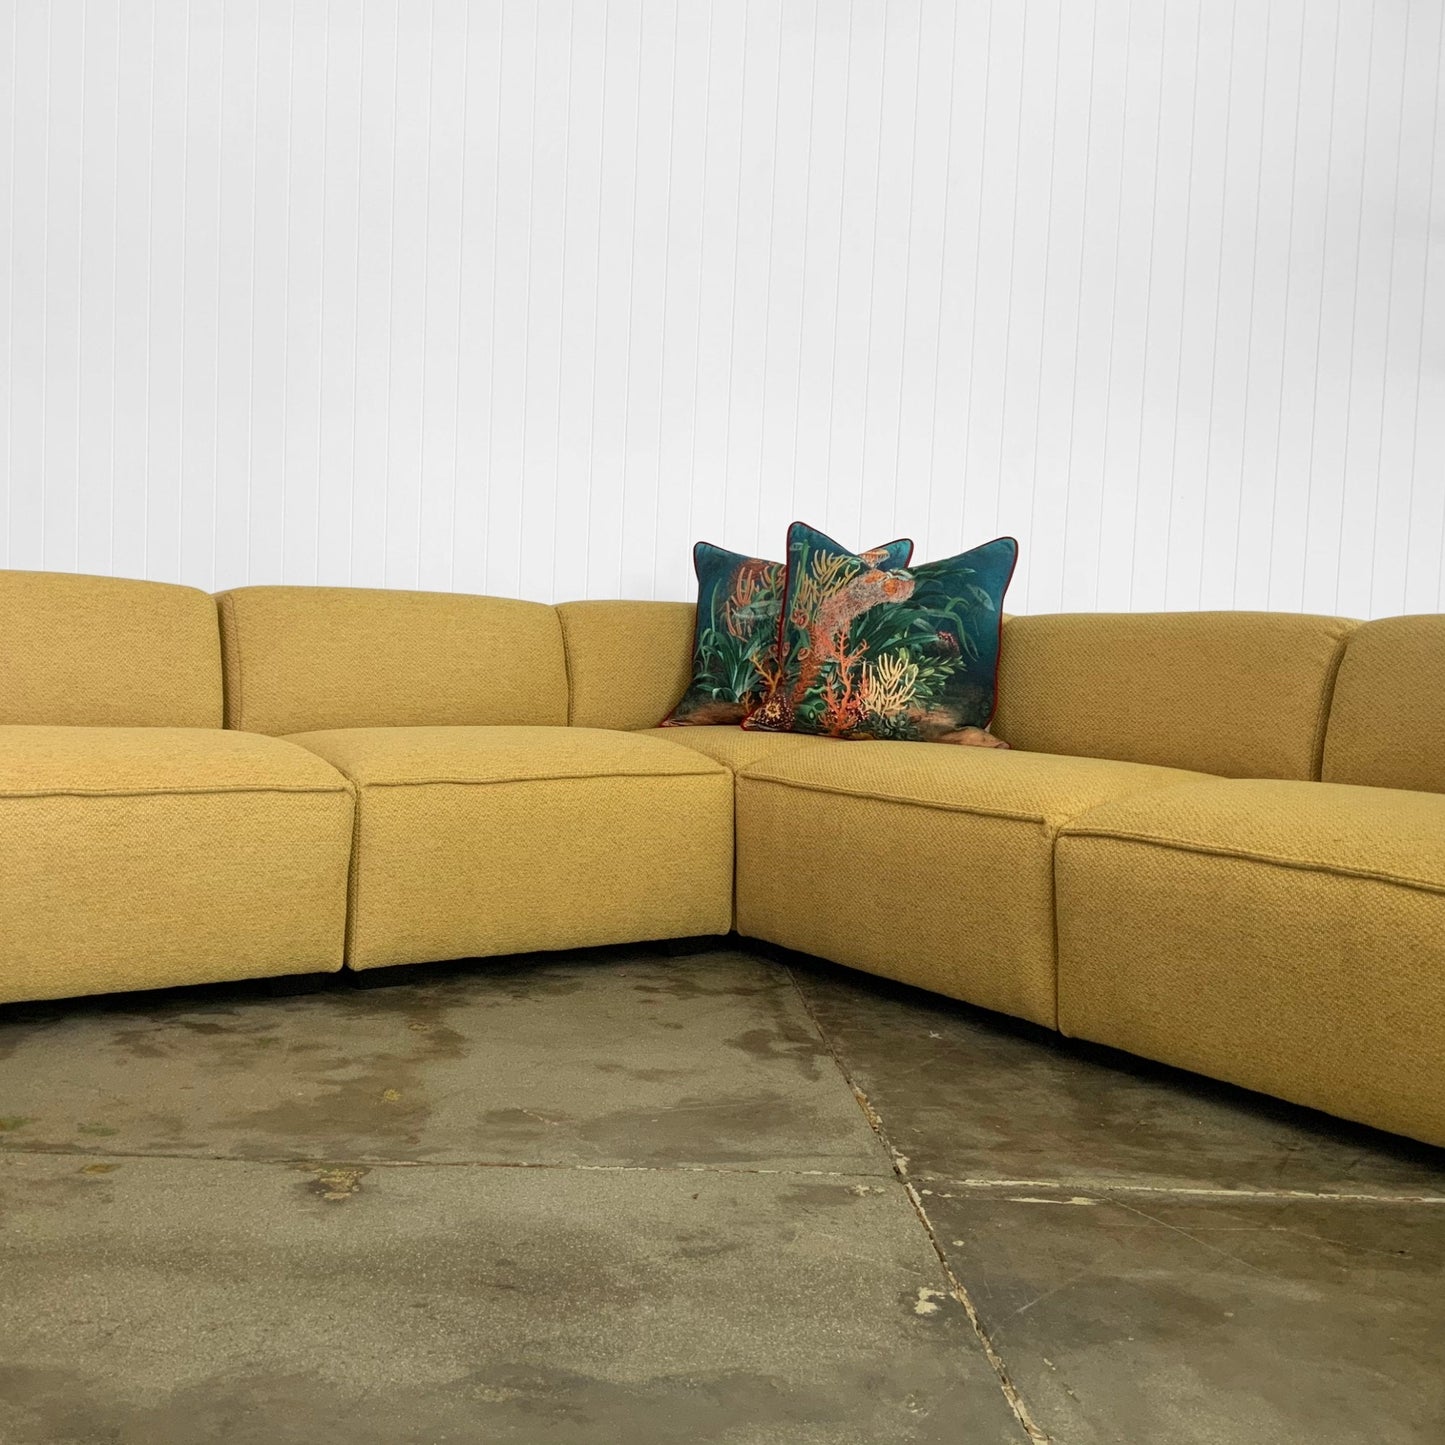 Mercury Sofa | Value Range Fabrics Multiple Sizes And Options Available Made To Order In Wa